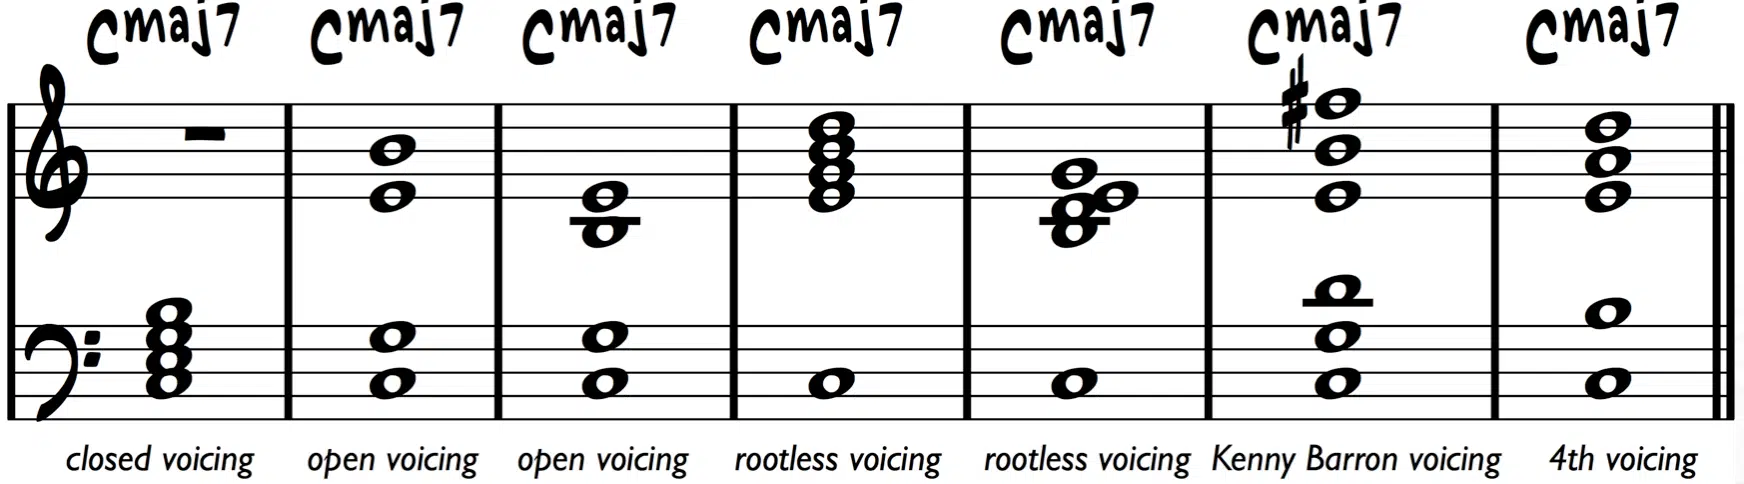 Chord Voicings - Unison